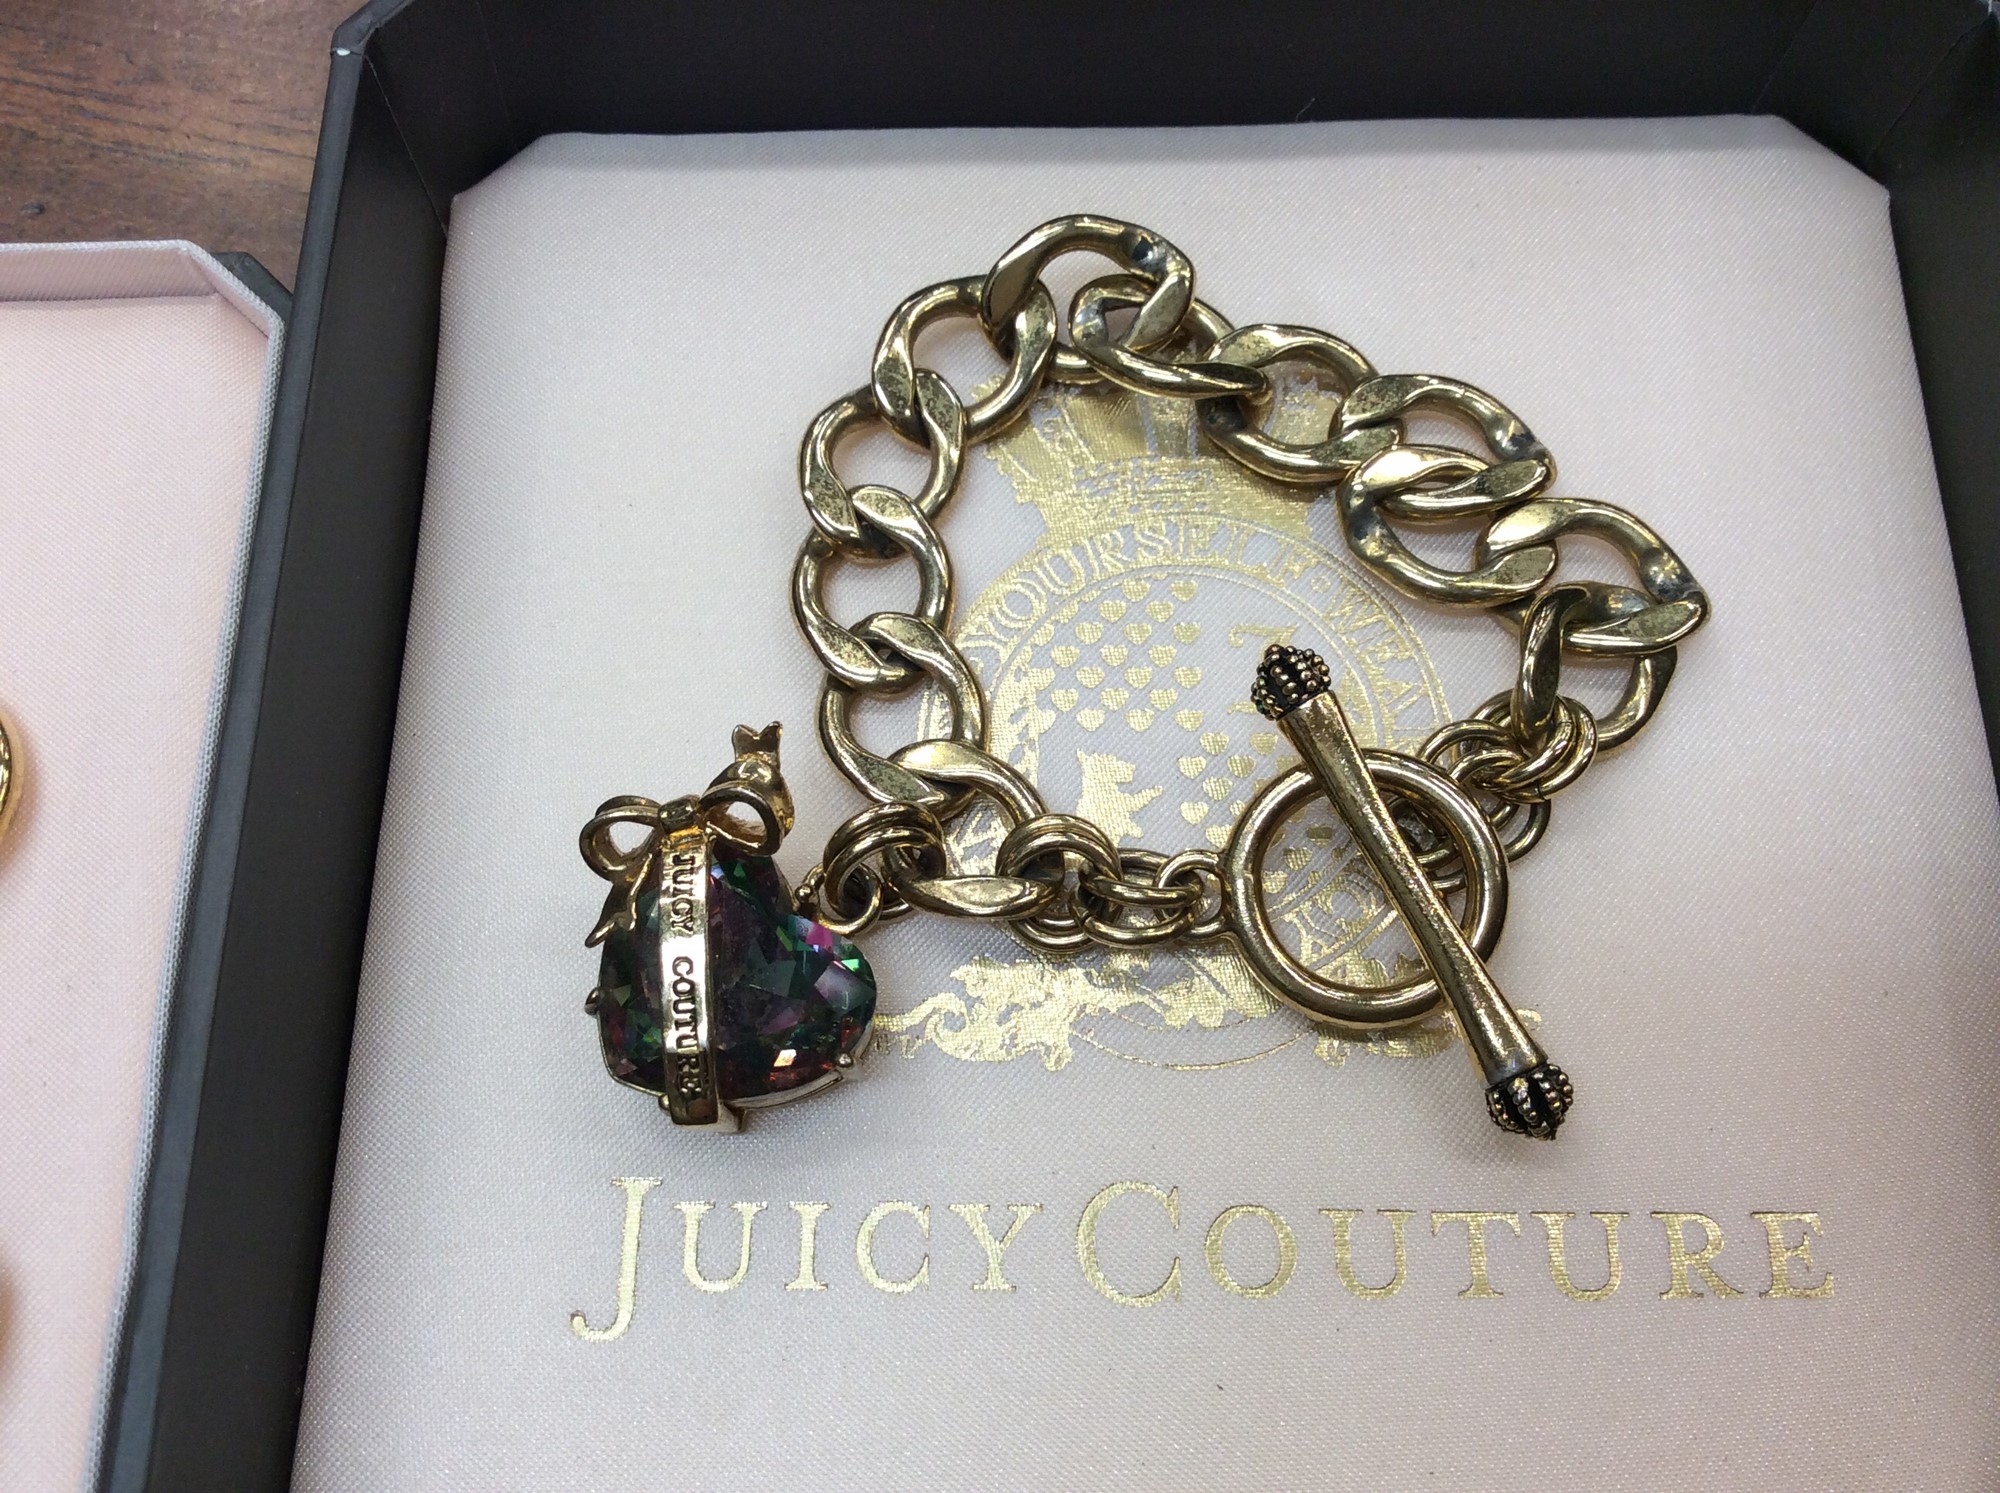 Juicy Couture gilt metal necklace and matching bracelet with bow